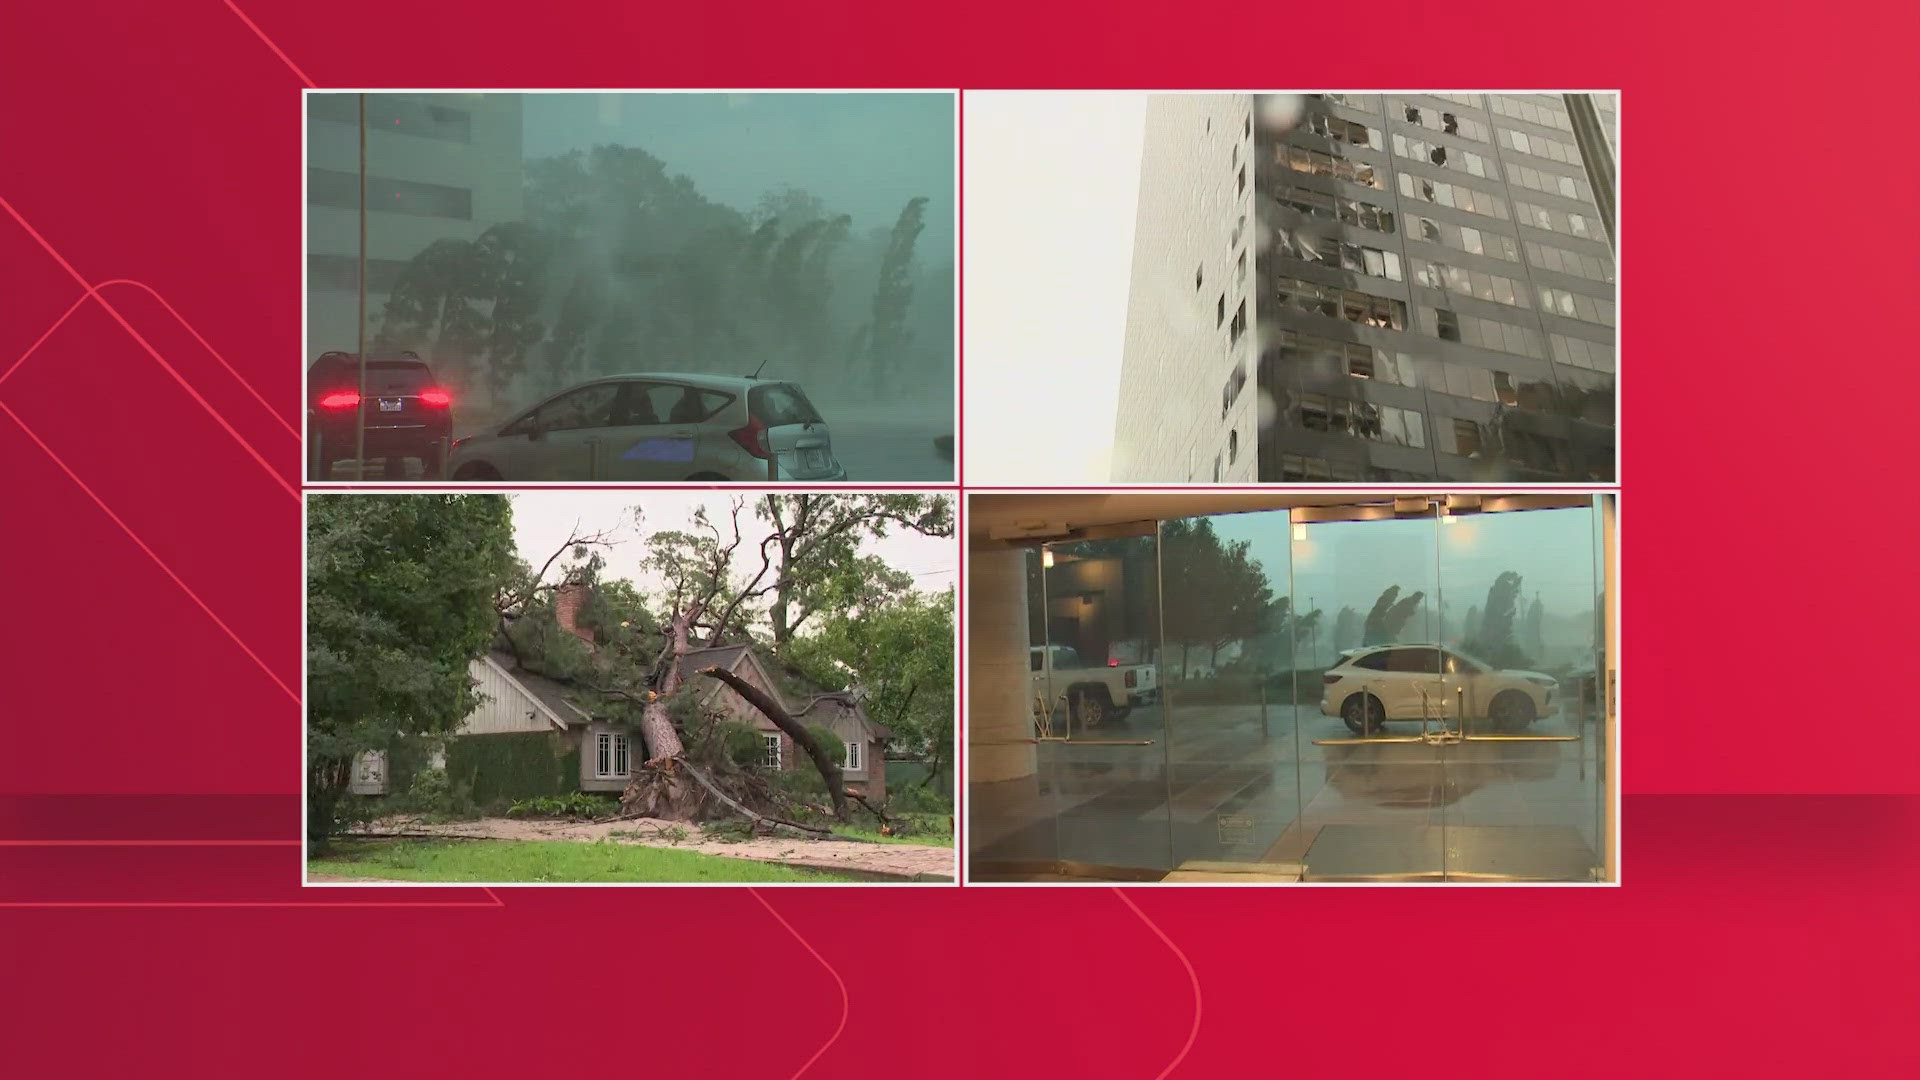 Four people were killed in Thursday's storms. Damage was reported all across Southeast Texas.